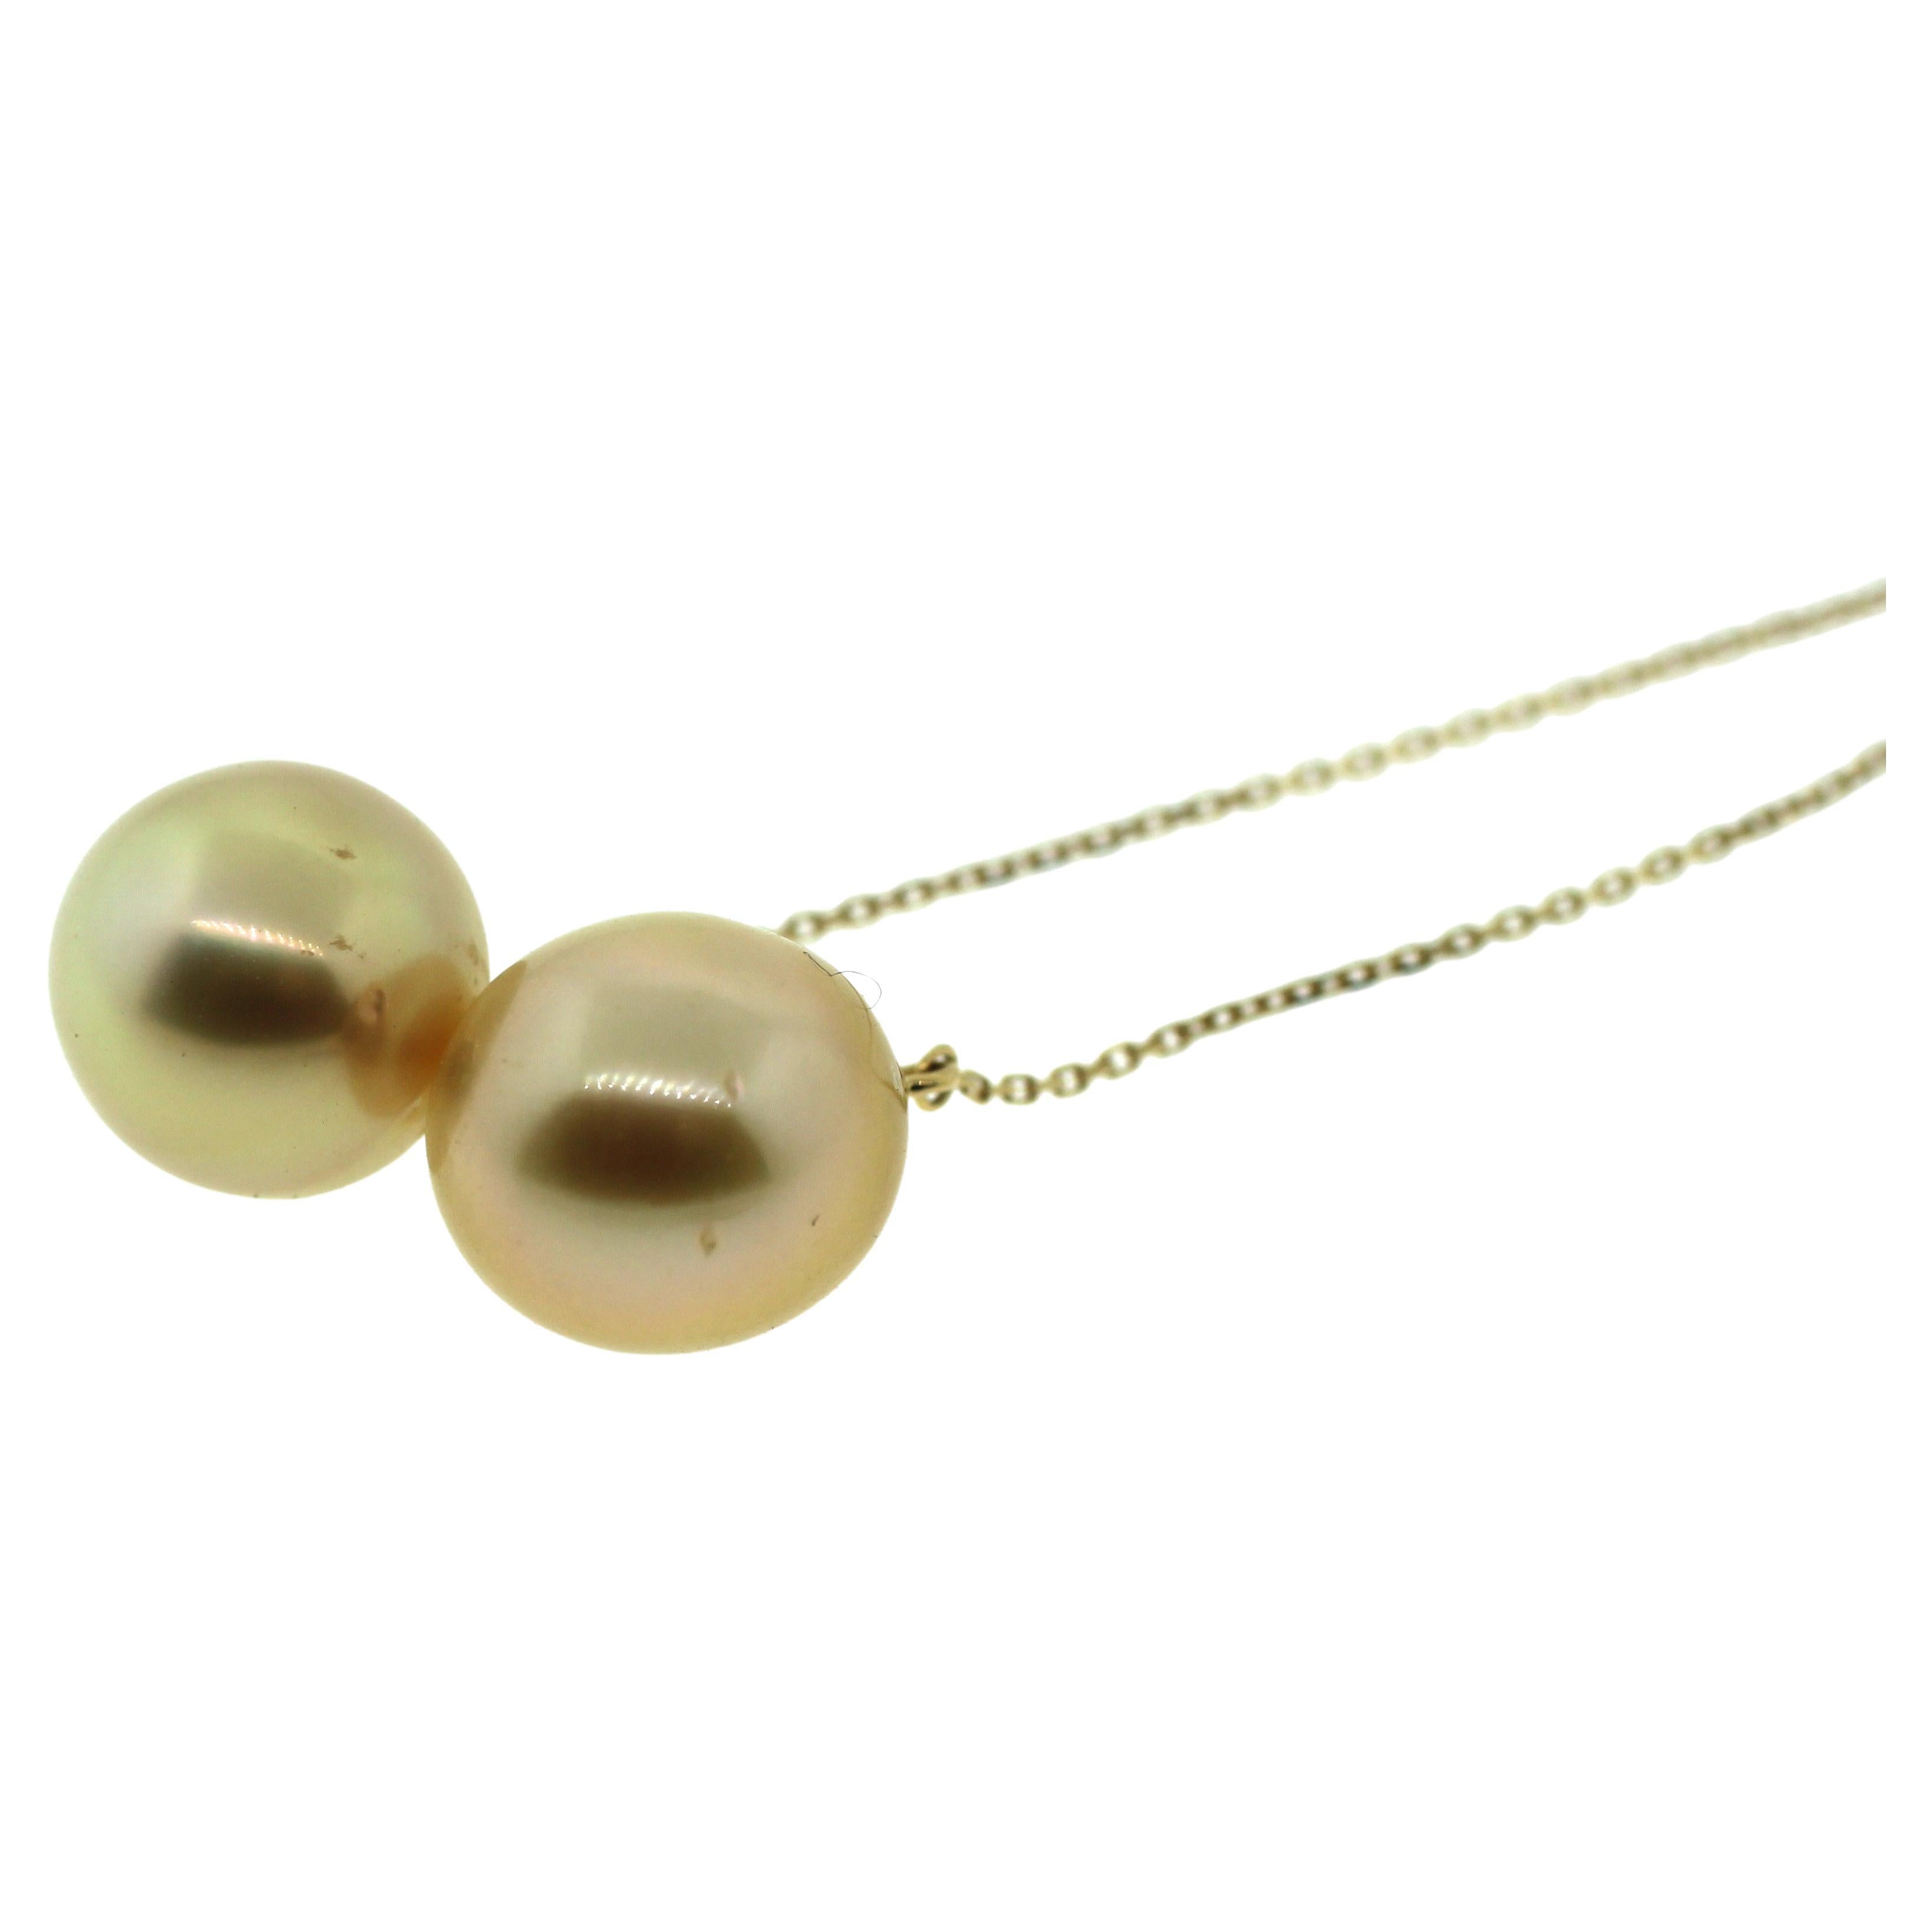 Hakimoto By Jewel Of Ocean
18K Yellow Gold 
Fancy Natural Color Golden South Sea Cultured Pearl Earrings.
Total item weight 4.3 grams
10 mm Natural  color Deep Golden South Sea Cultured Pearls
18K Yellow Gold High Polish
Orient: Very Good
Luster: